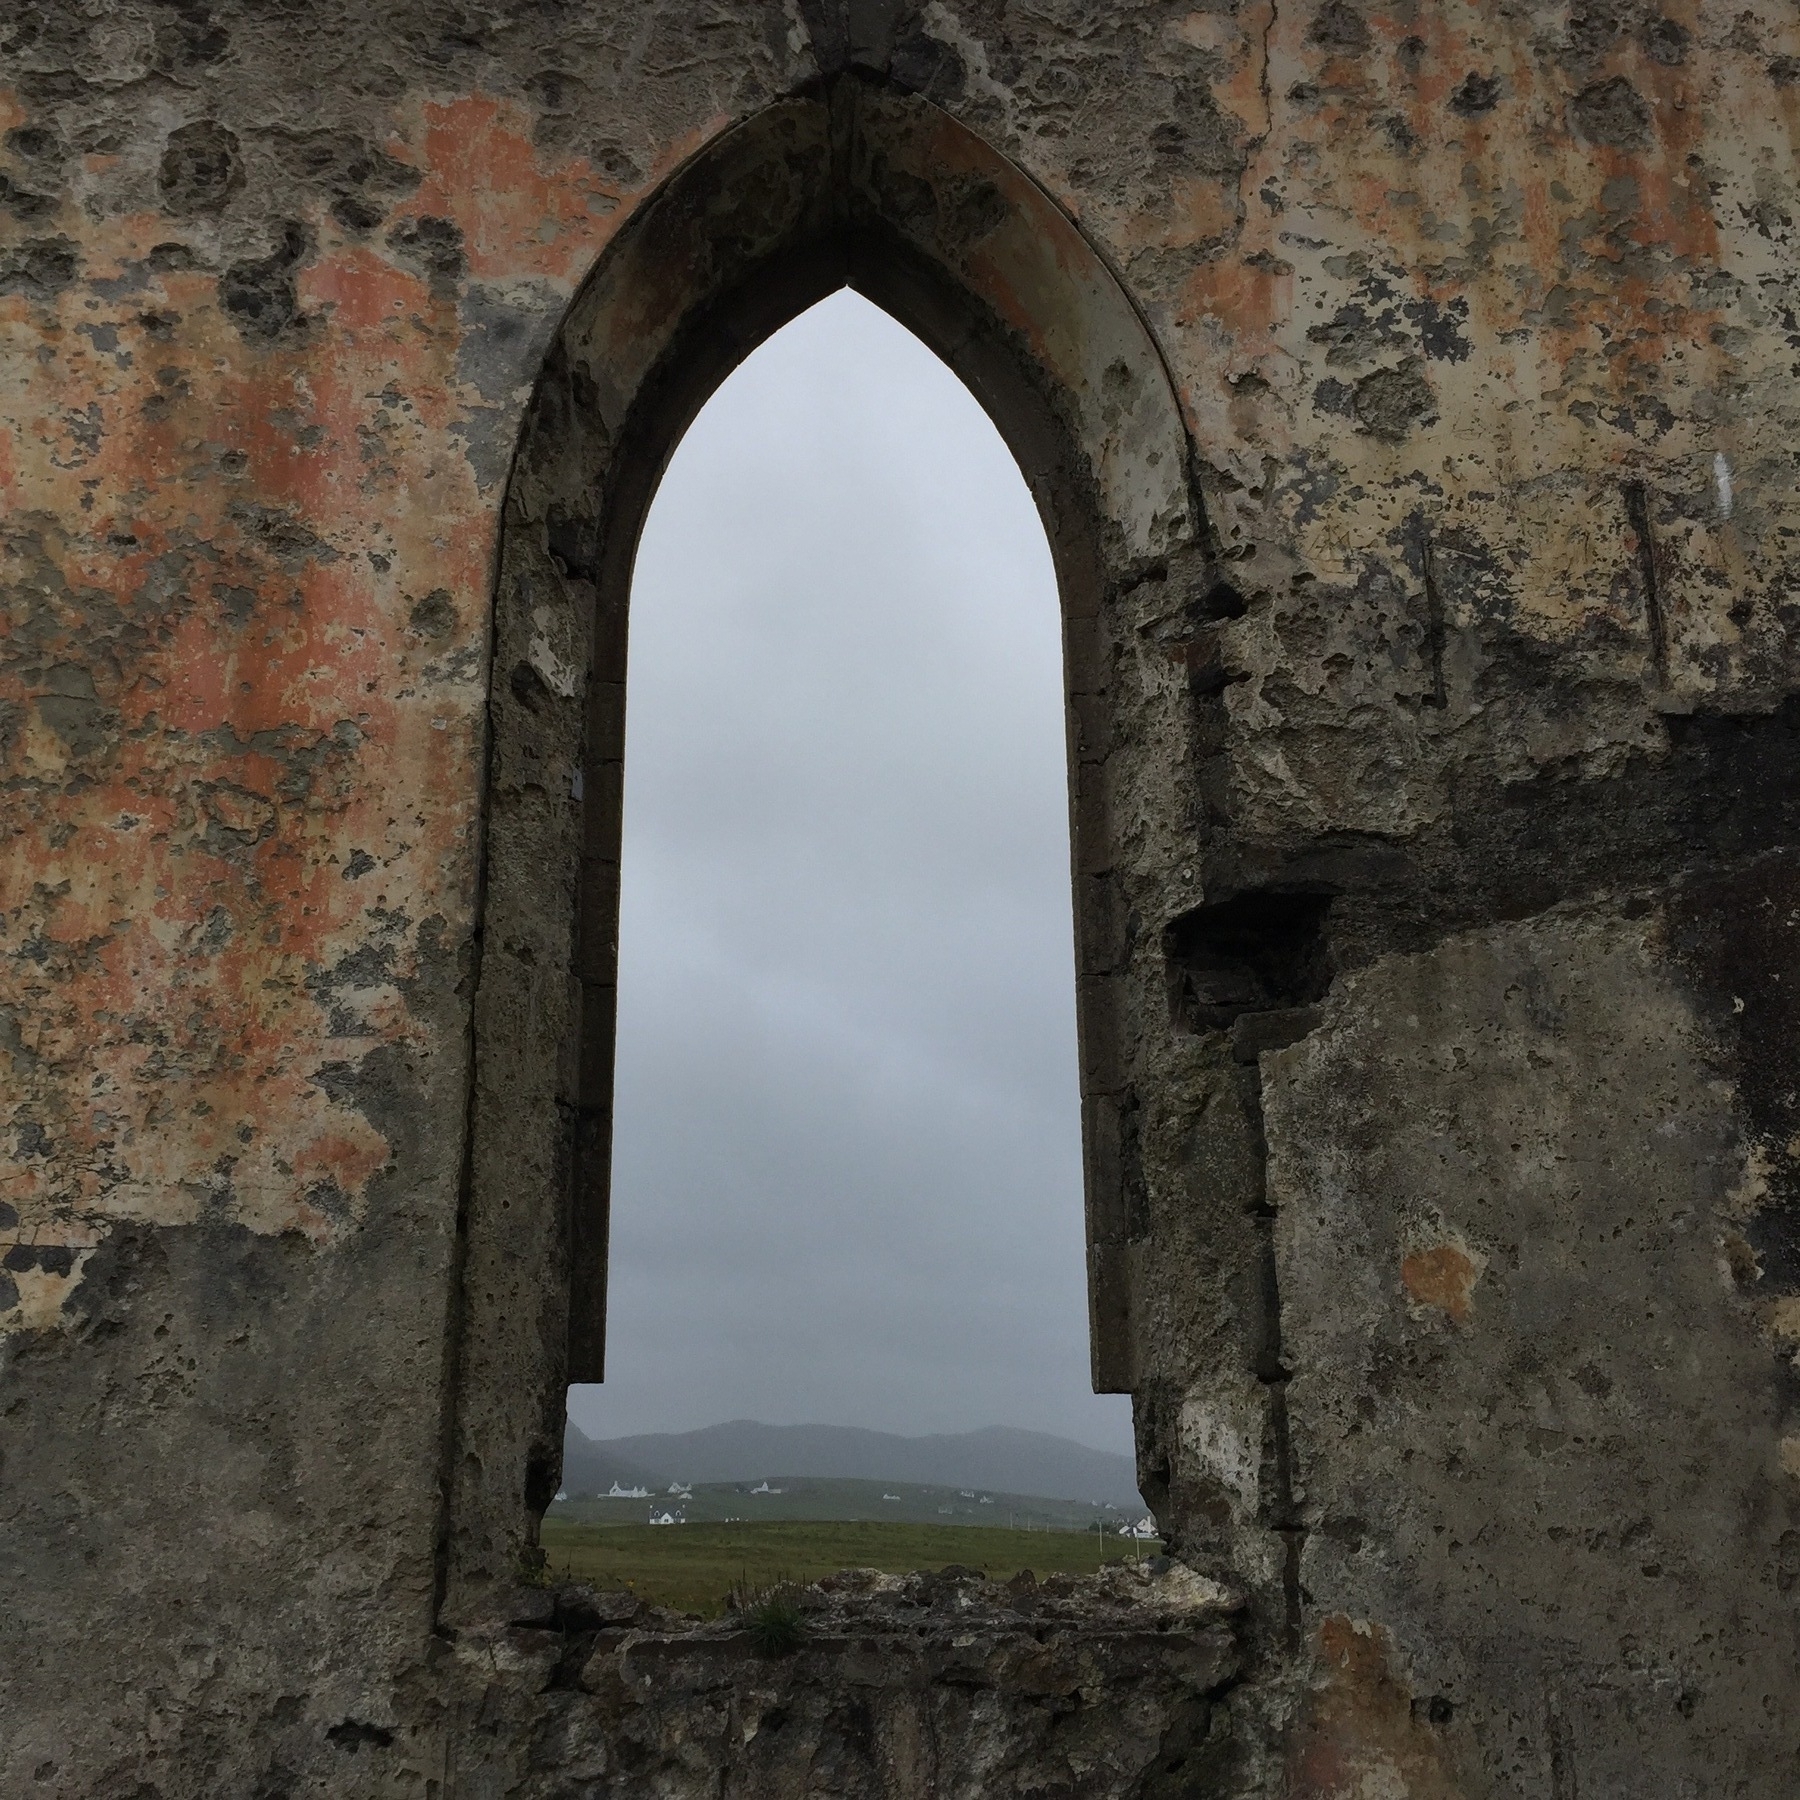 A frame of an old church window in the ruins of a church, looking out on an overcast, wet and windy day